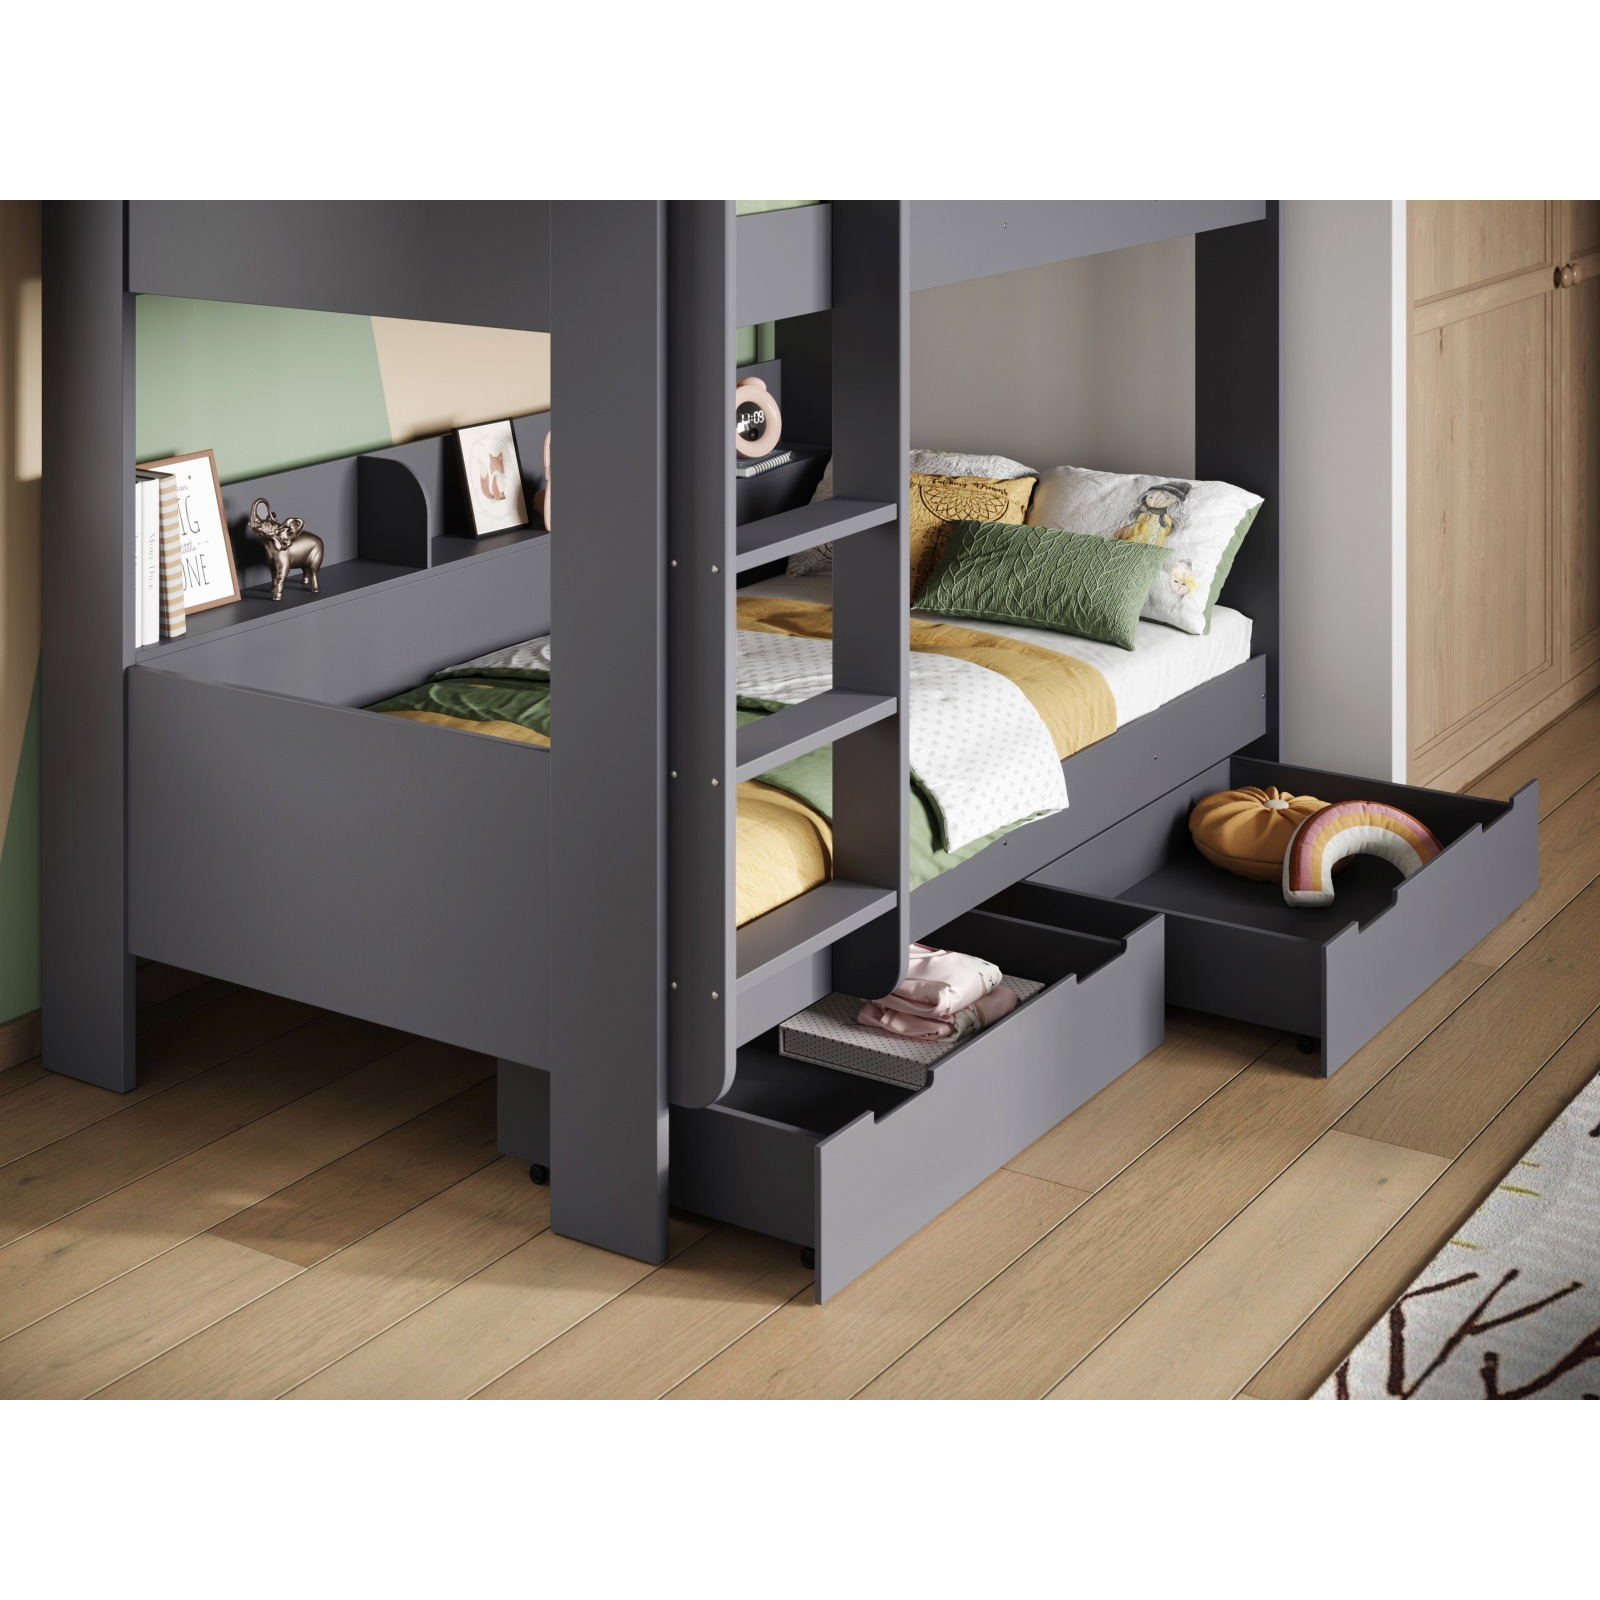 Flair　Grey　Bed　by　with　Wooden　Eddie　Kingdom　Storage　Bunk　Shelves　Bed